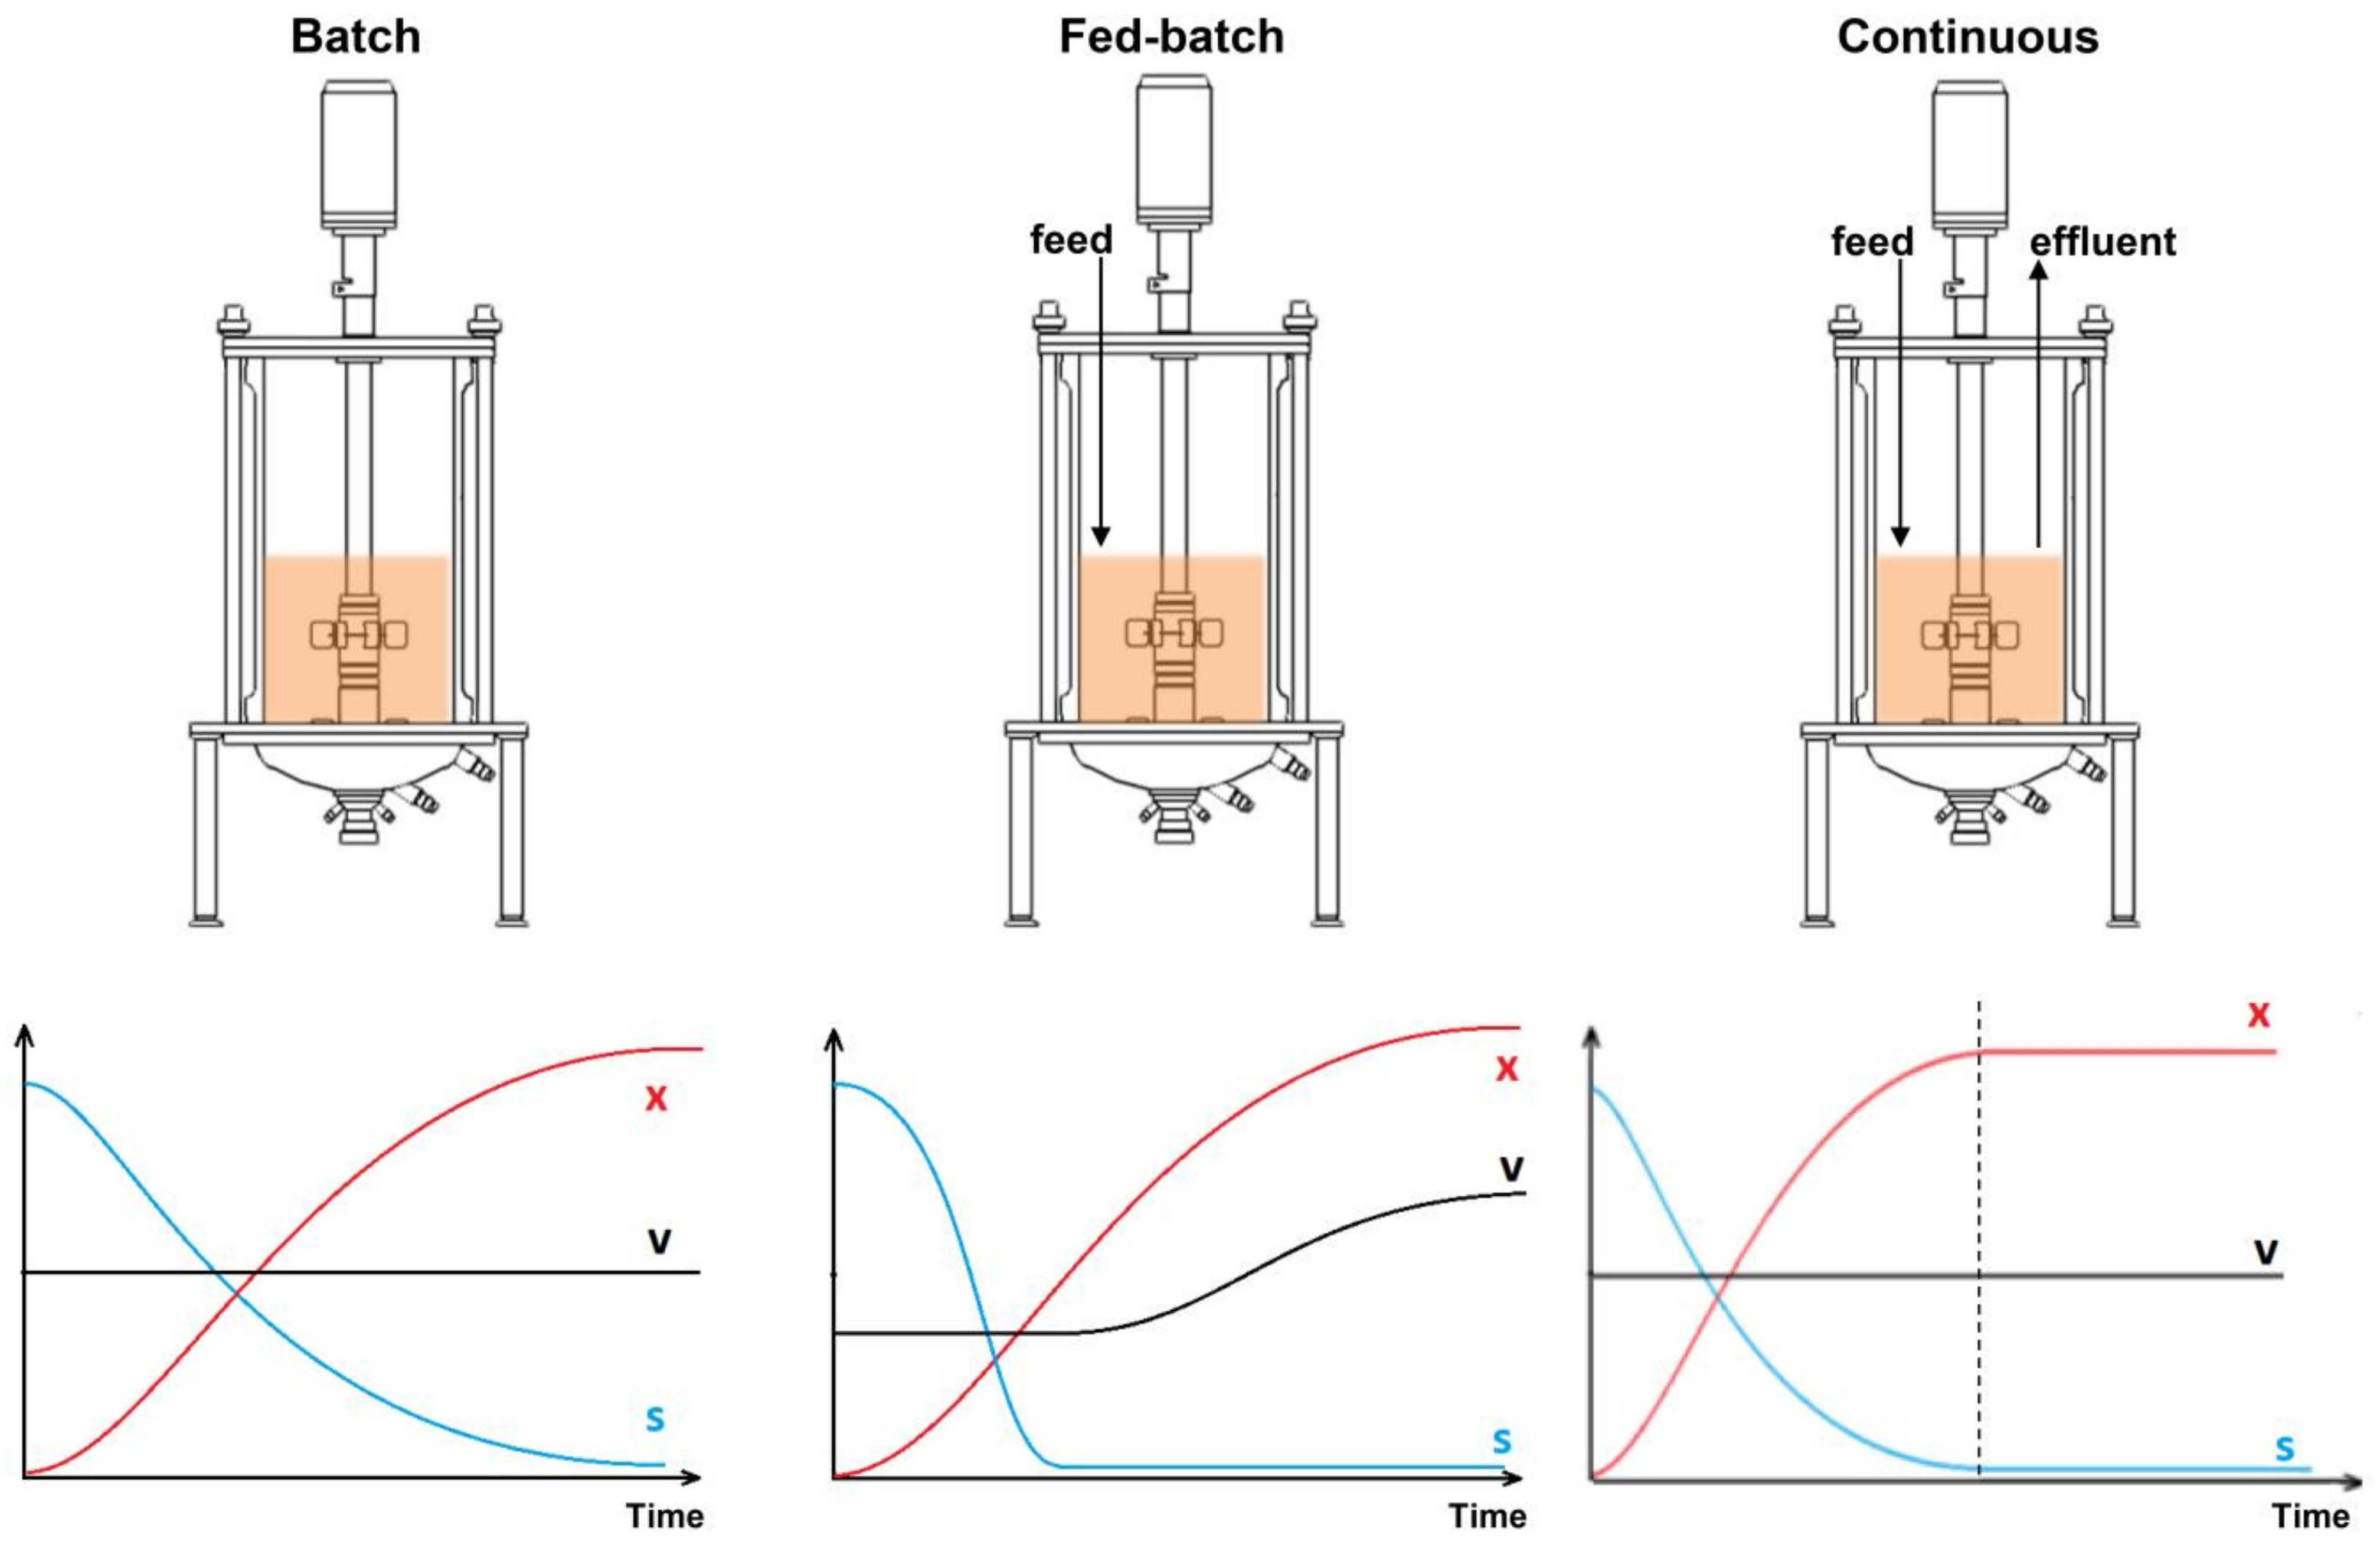 Fermentation | Free Full-Text | Model Predictive Control&mdash;A Stand Out  among Competitors for Fed-Batch Fermentation Improvement